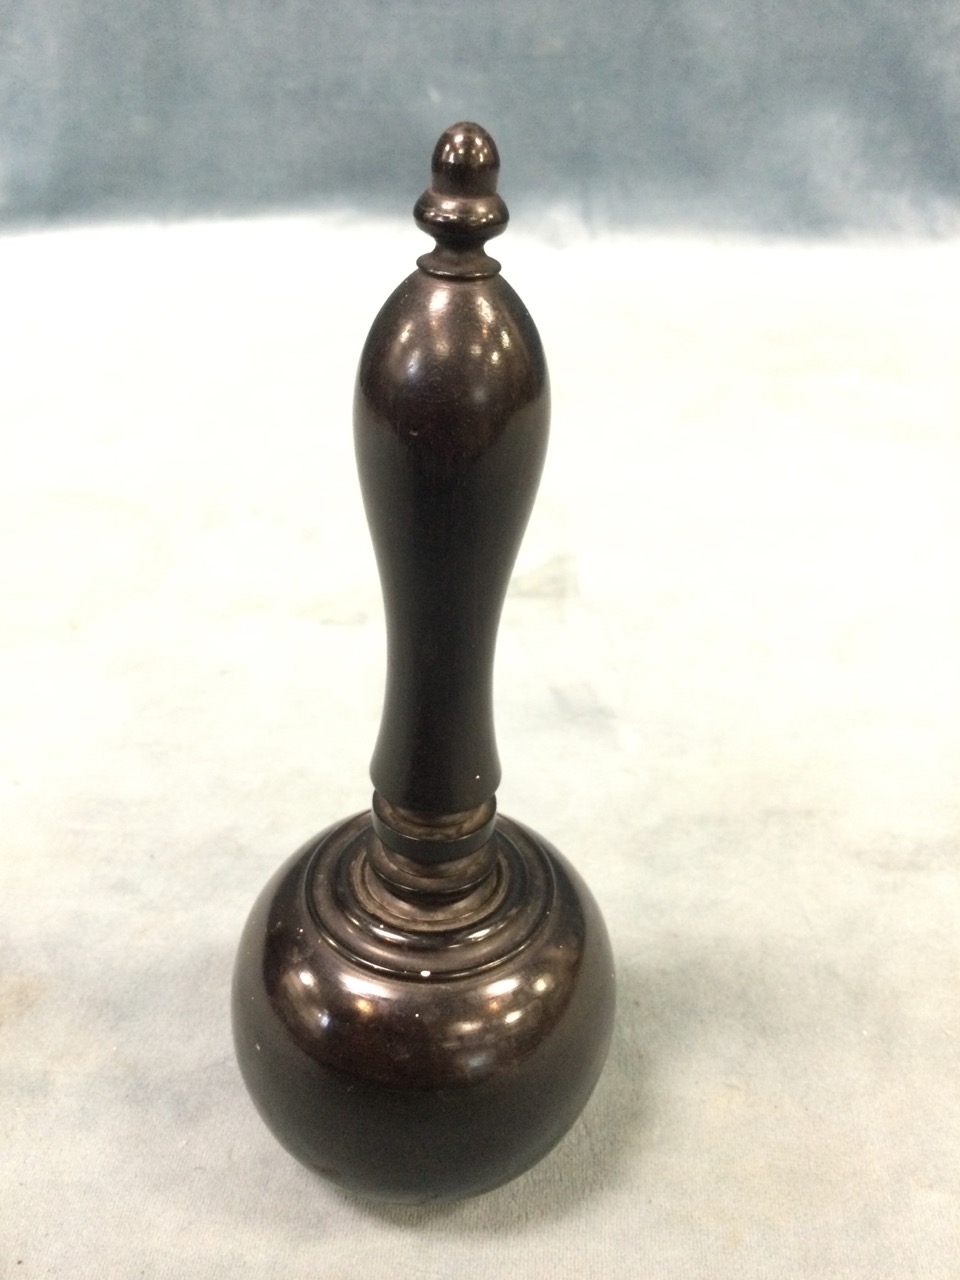 A Victorian ebony gavel with turned handle and ball mallet, mounted with silver presentational panel - Image 2 of 3